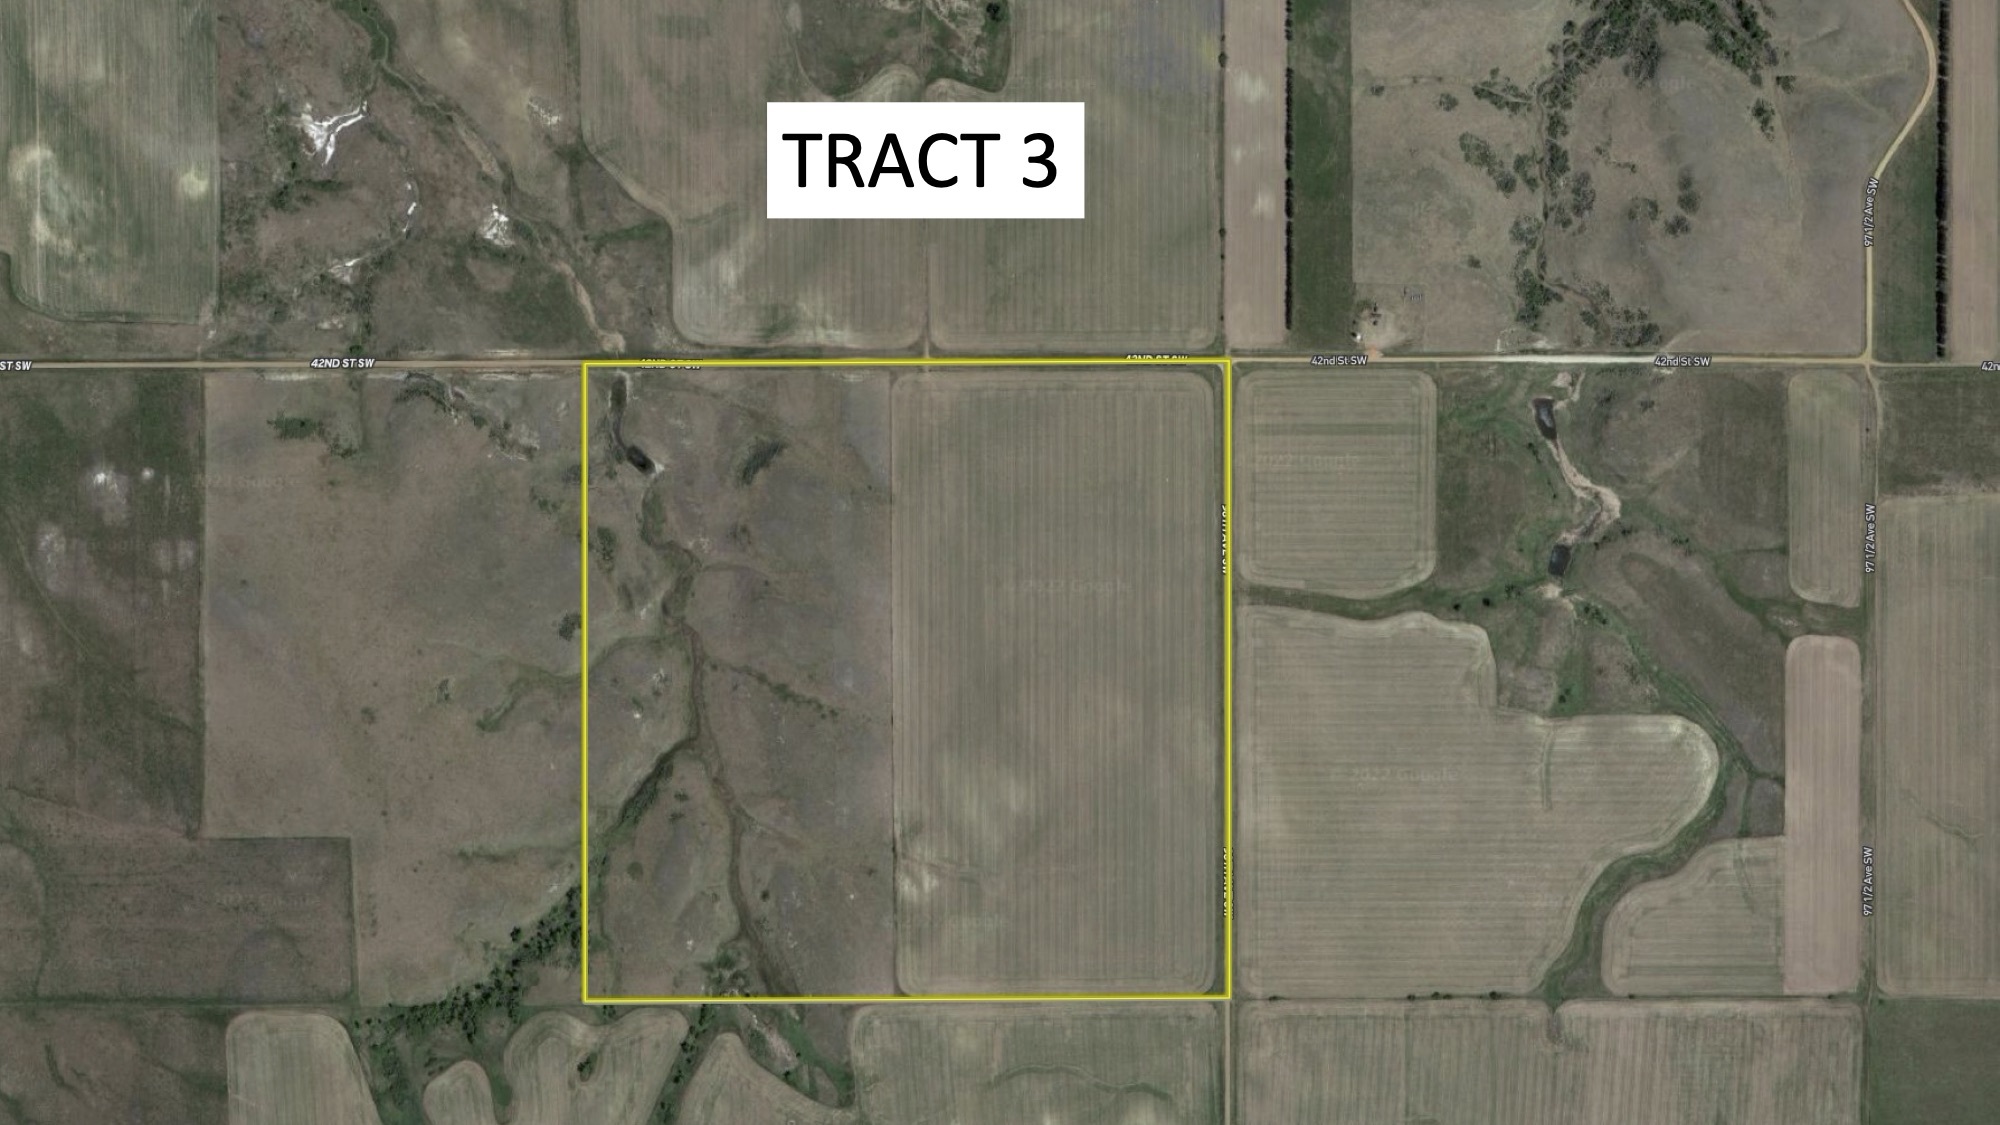 TRACT 3 AERIAL